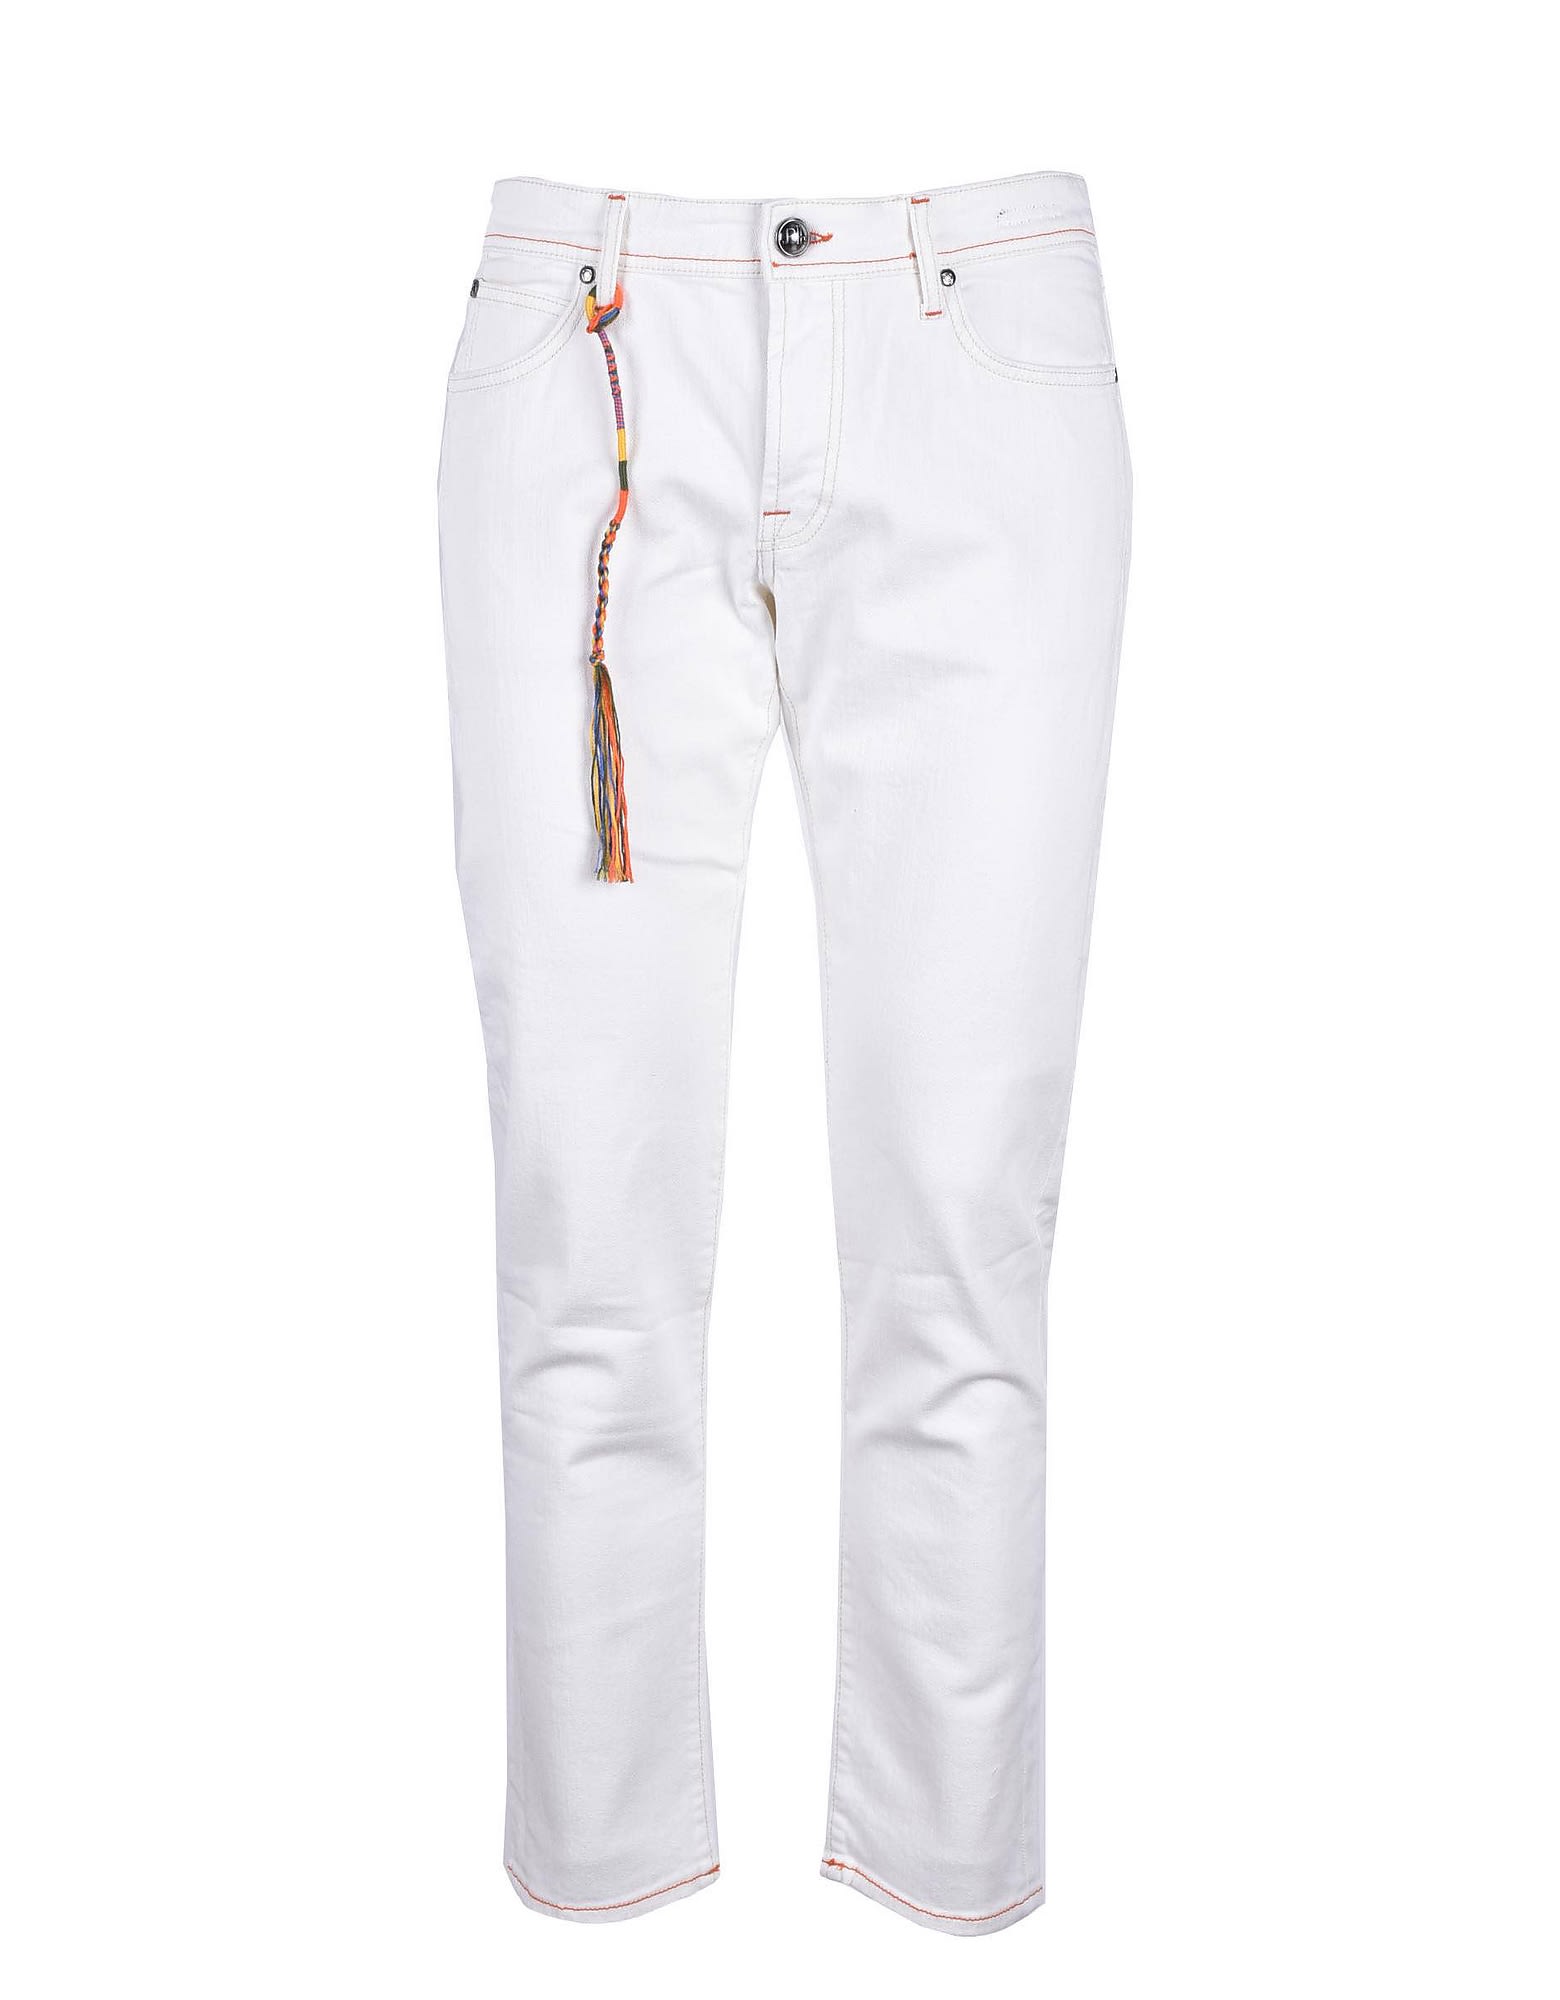 Roy Rogers Mens White Jeans